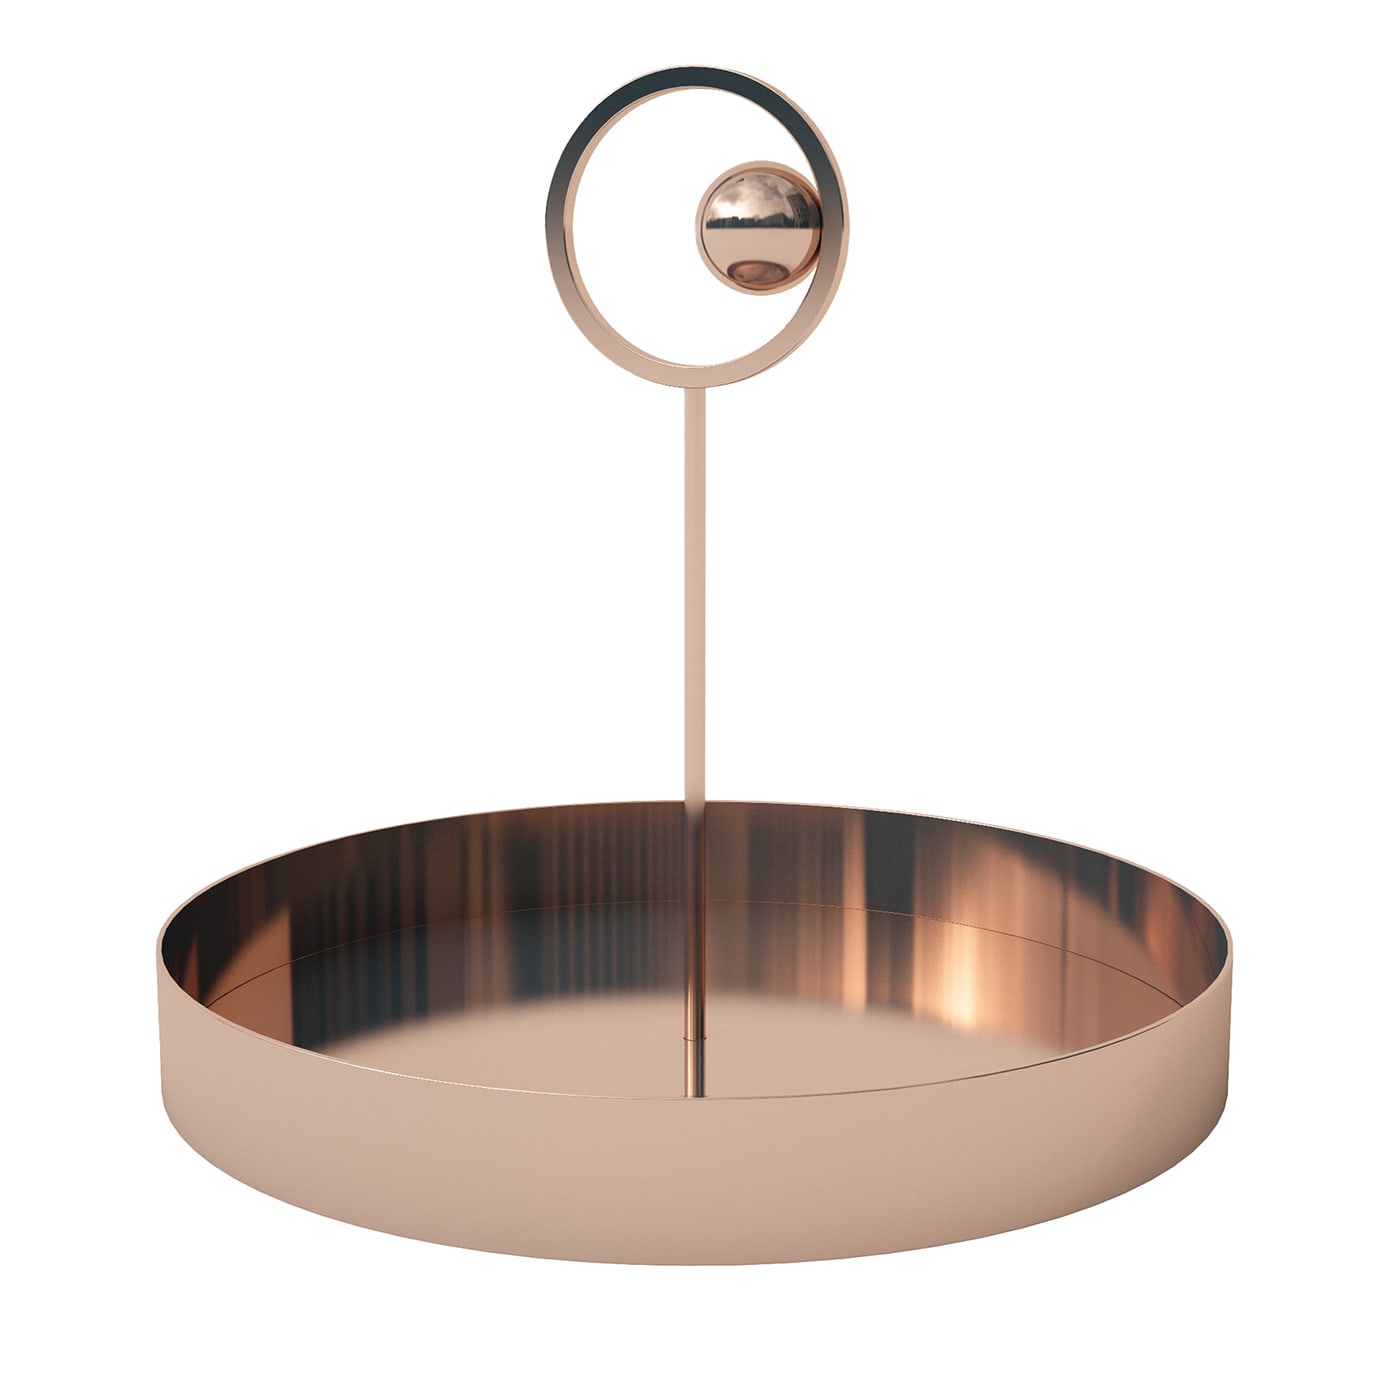 OFF THE MOON Tray by Thomas Dariel - Cappellini